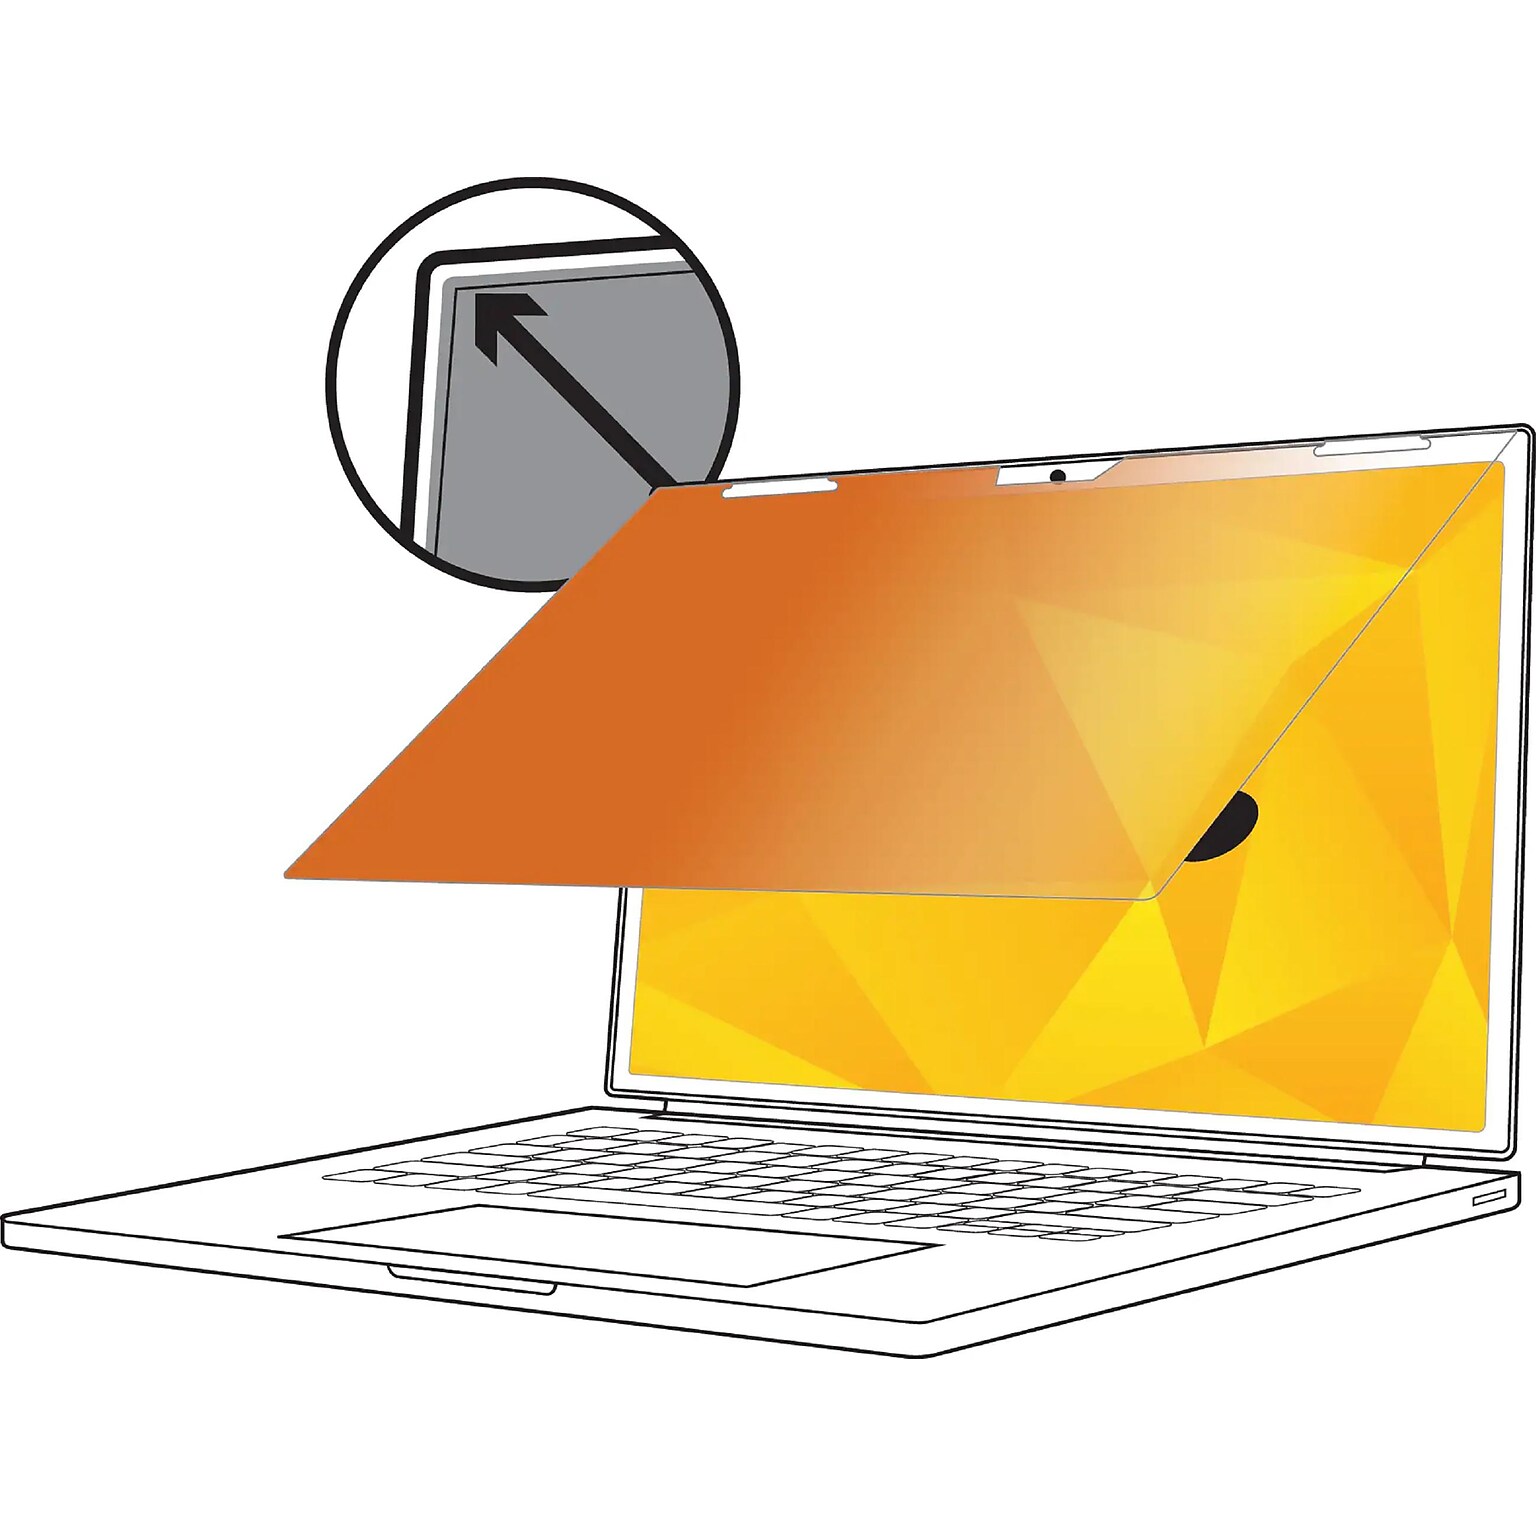 3M Gold Privacy Filter for 14 Widescreen Laptop with COMPLY Attachment System, 16:9 Aspect Ratio (GF140W9B)